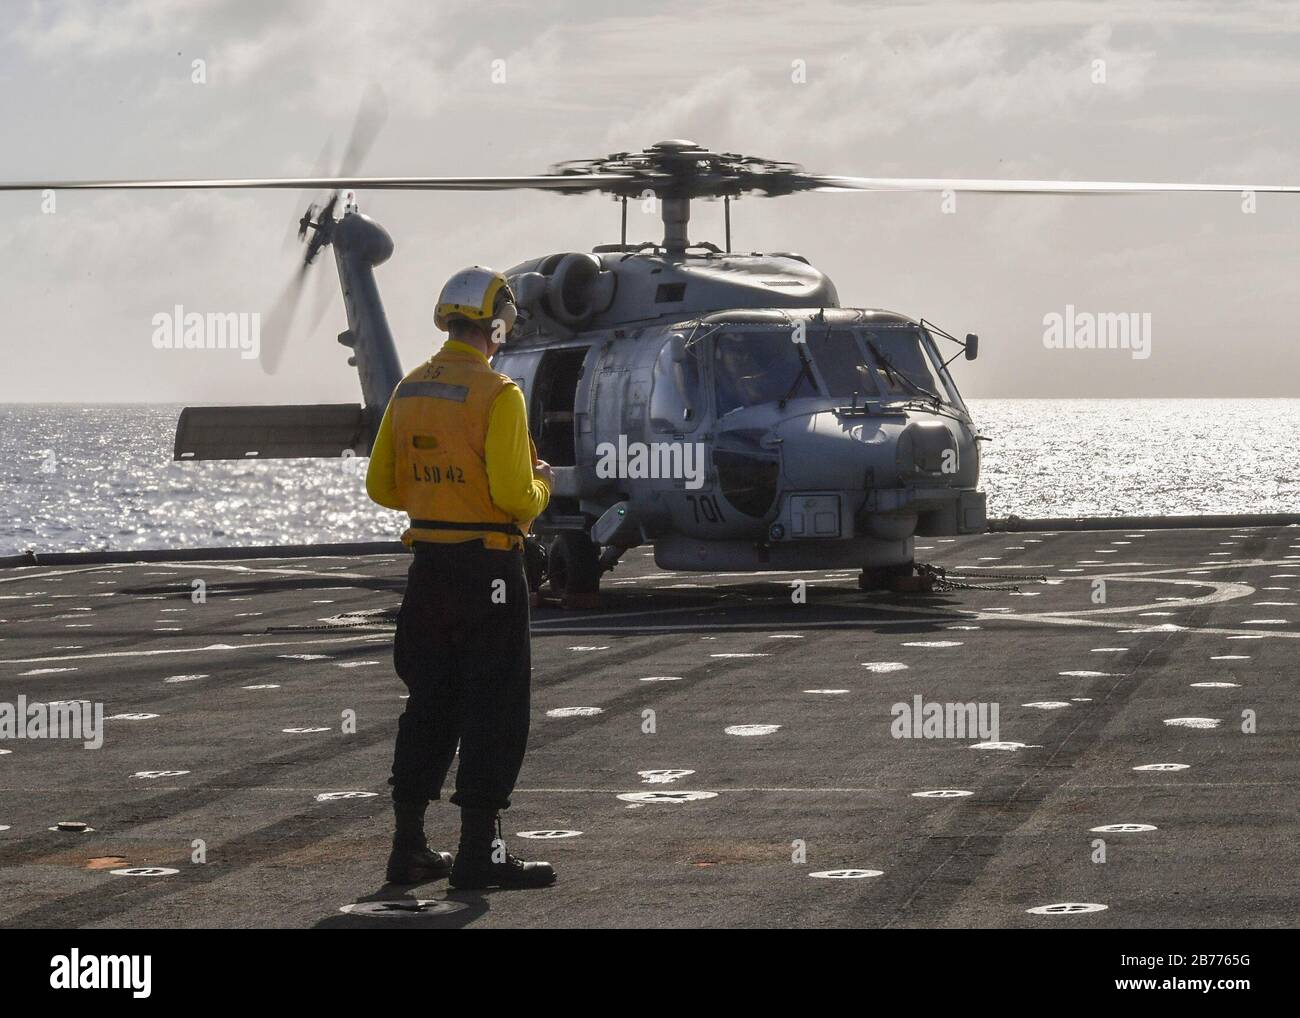 PHILIPPINE SEA (March 13, 2020) Boatswain's Mate 3rd Class Jack Erickson, from Lowell, Mass., observes an MH-60R SeaHawk helicopter assigned to the “Saberhawks” of Helicopter Maritime Strike Squadron (HSM) 77 on the flight deck of Whidbey Island-class dock landing ship USS Germantown (LSD 42) during flight operations. Germantown, part of America Expeditionary Strike Group, 31st Marine Expeditionary Unit team, is operating in the U.S. 7th Fleet area of operations to enhance interoperability with allies and partners and serves as a ready response force to defend peace and stability in the Indo-P Stock Photo